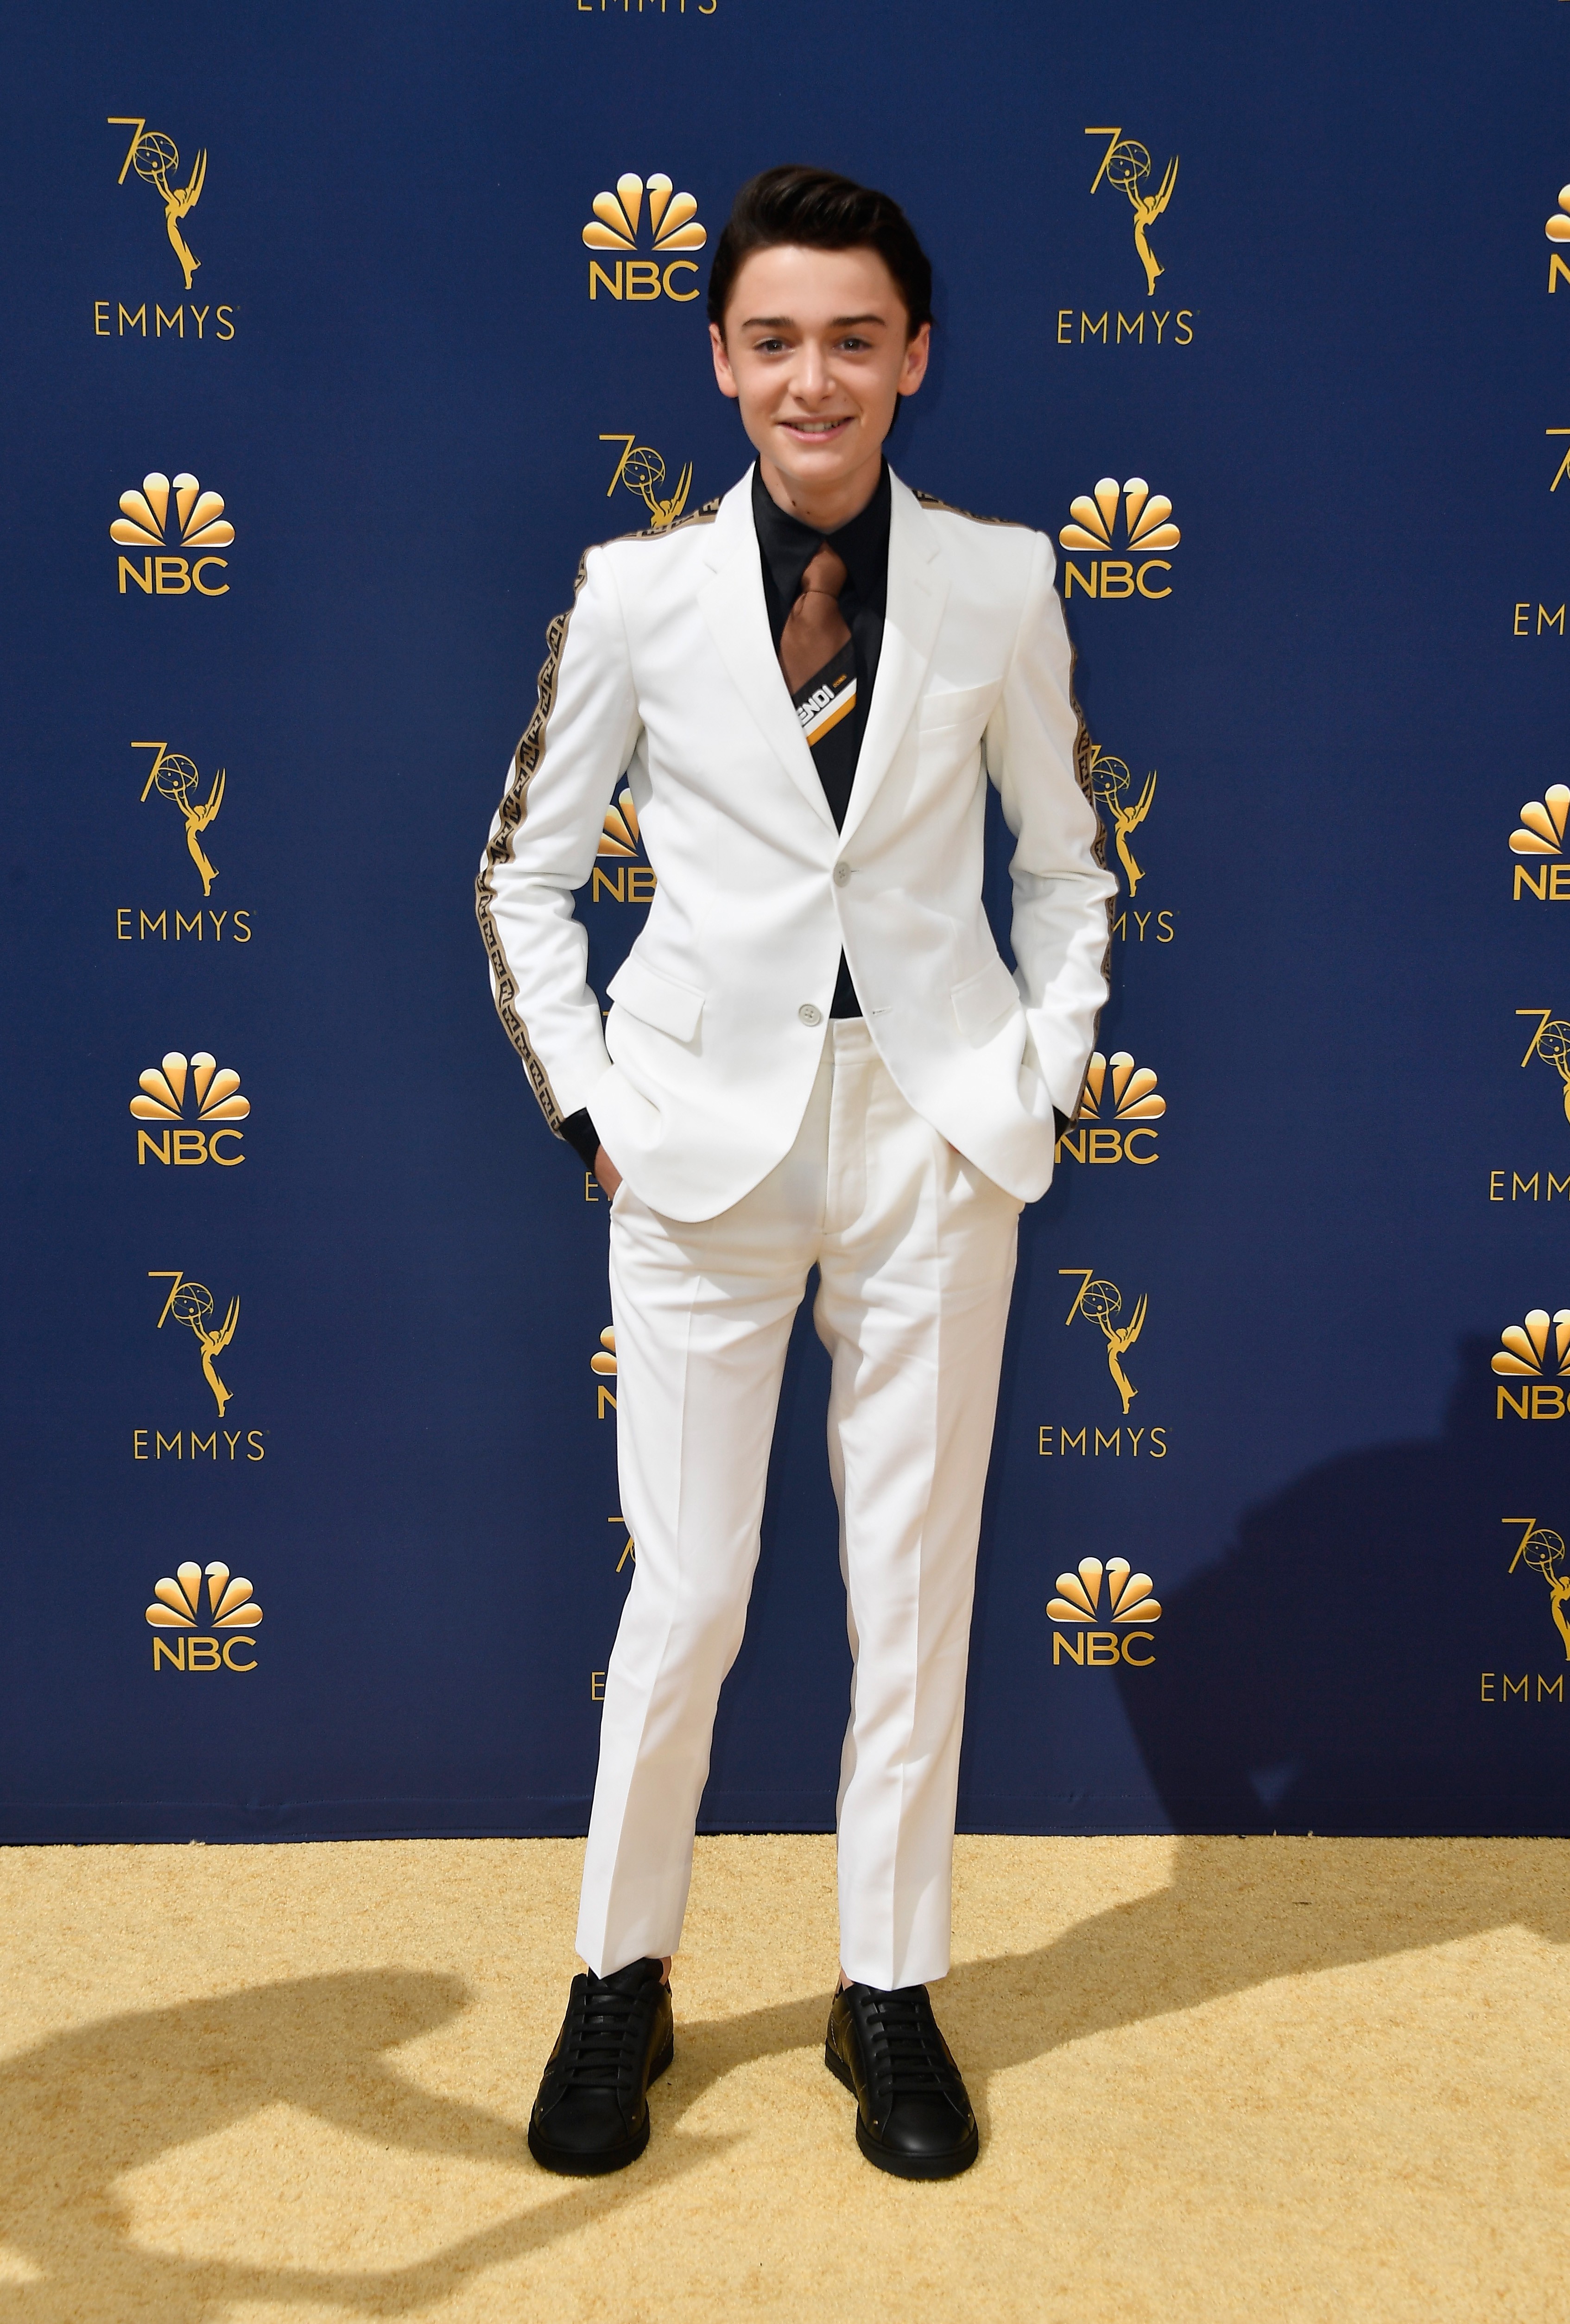 LOS ANGELES, CA - SEPTEMBER 17:  Noah Schnapp attends the 70th Emmy Awards at Microsoft Theater on September 17, 2018 in Los Angeles, California.  (Photo by Frazer Harrison/Getty Images) (Foto: Getty Images)